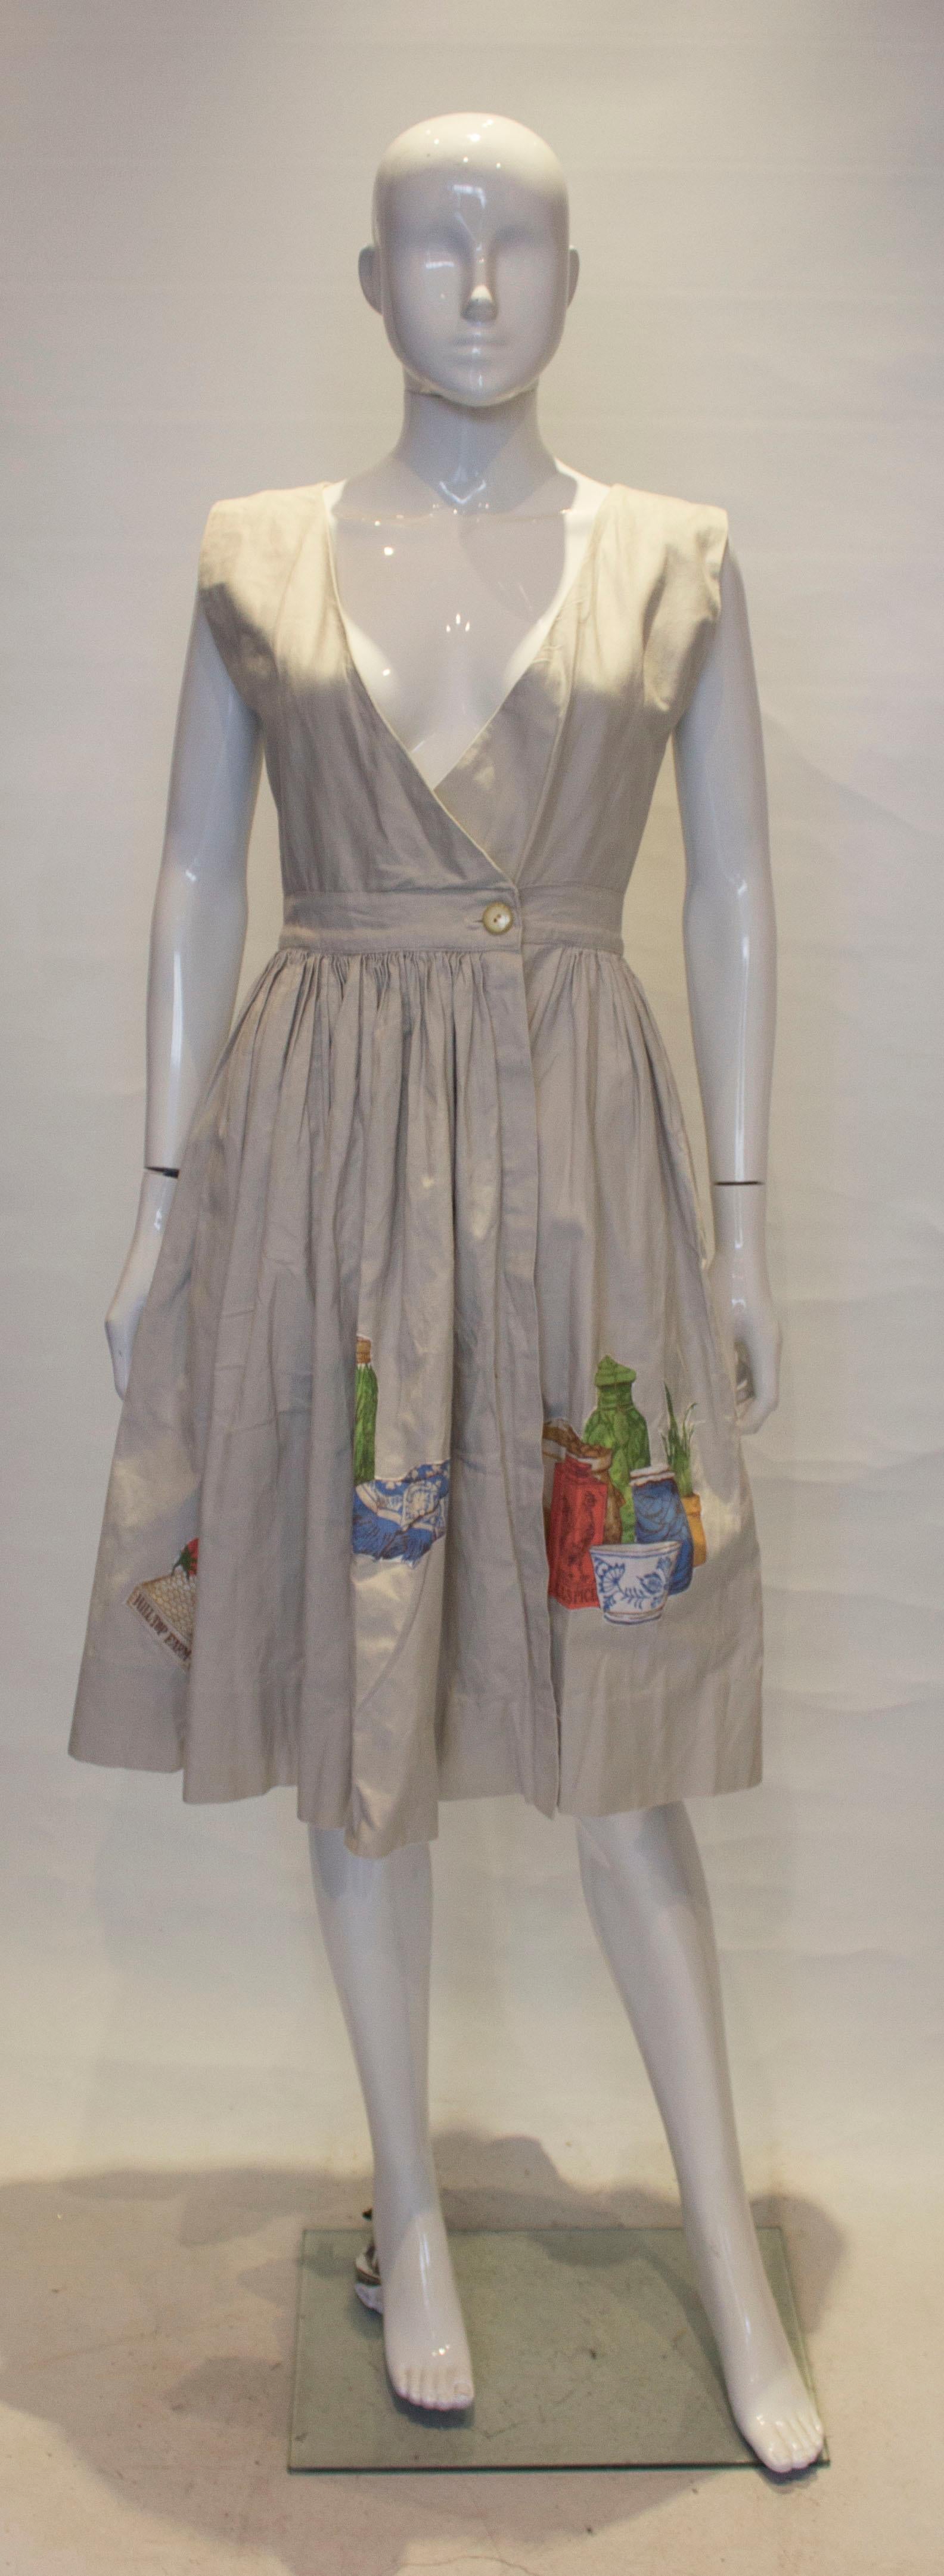 A fun dress from Nieman Marcus. The dress is in a dove grey linen with a wrap over front and pocket on either side. On the lower skirt area area are decorative food detail.